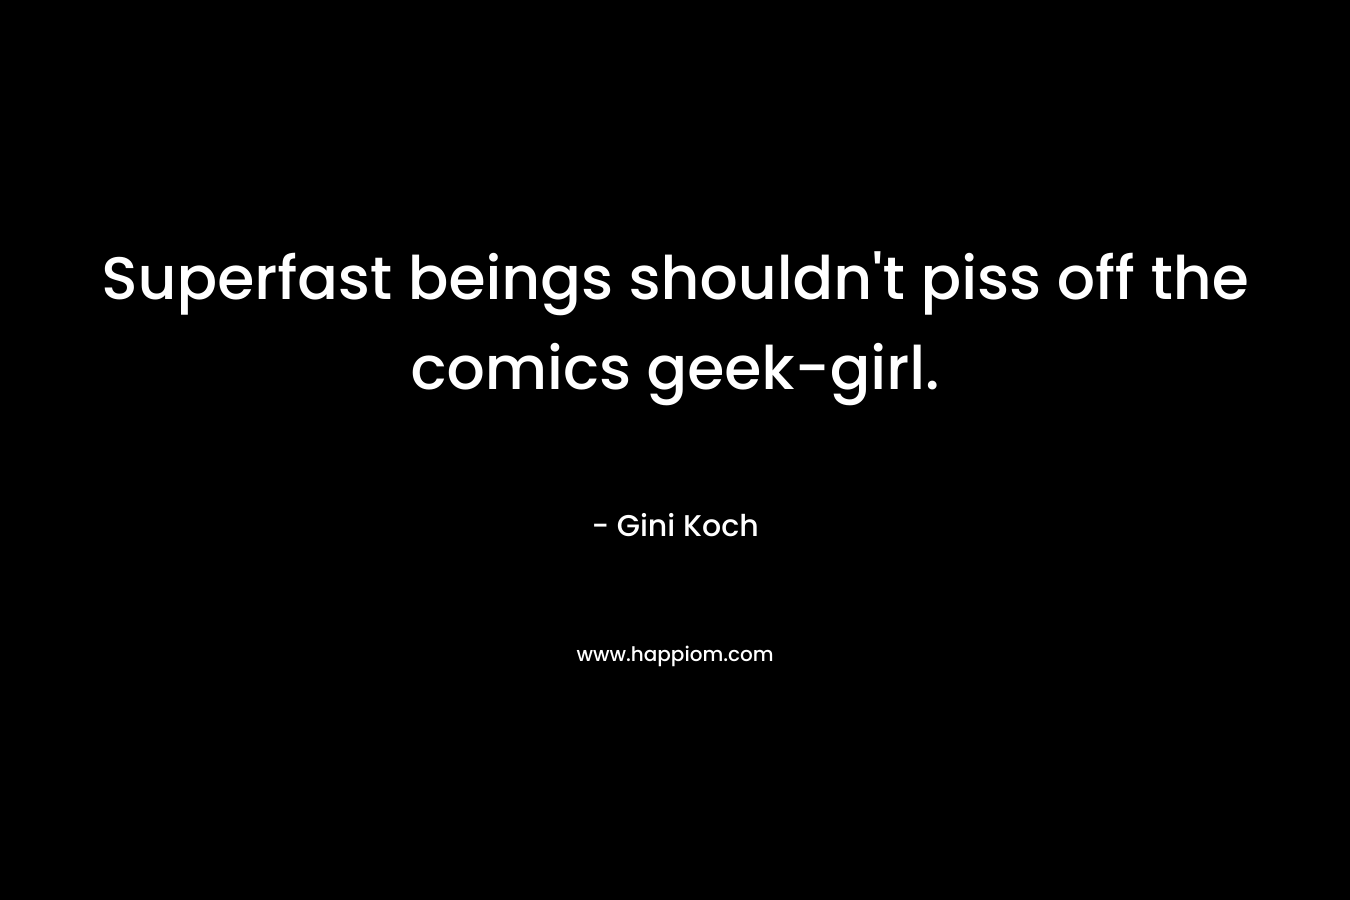 Superfast beings shouldn’t piss off the comics geek-girl. – Gini Koch